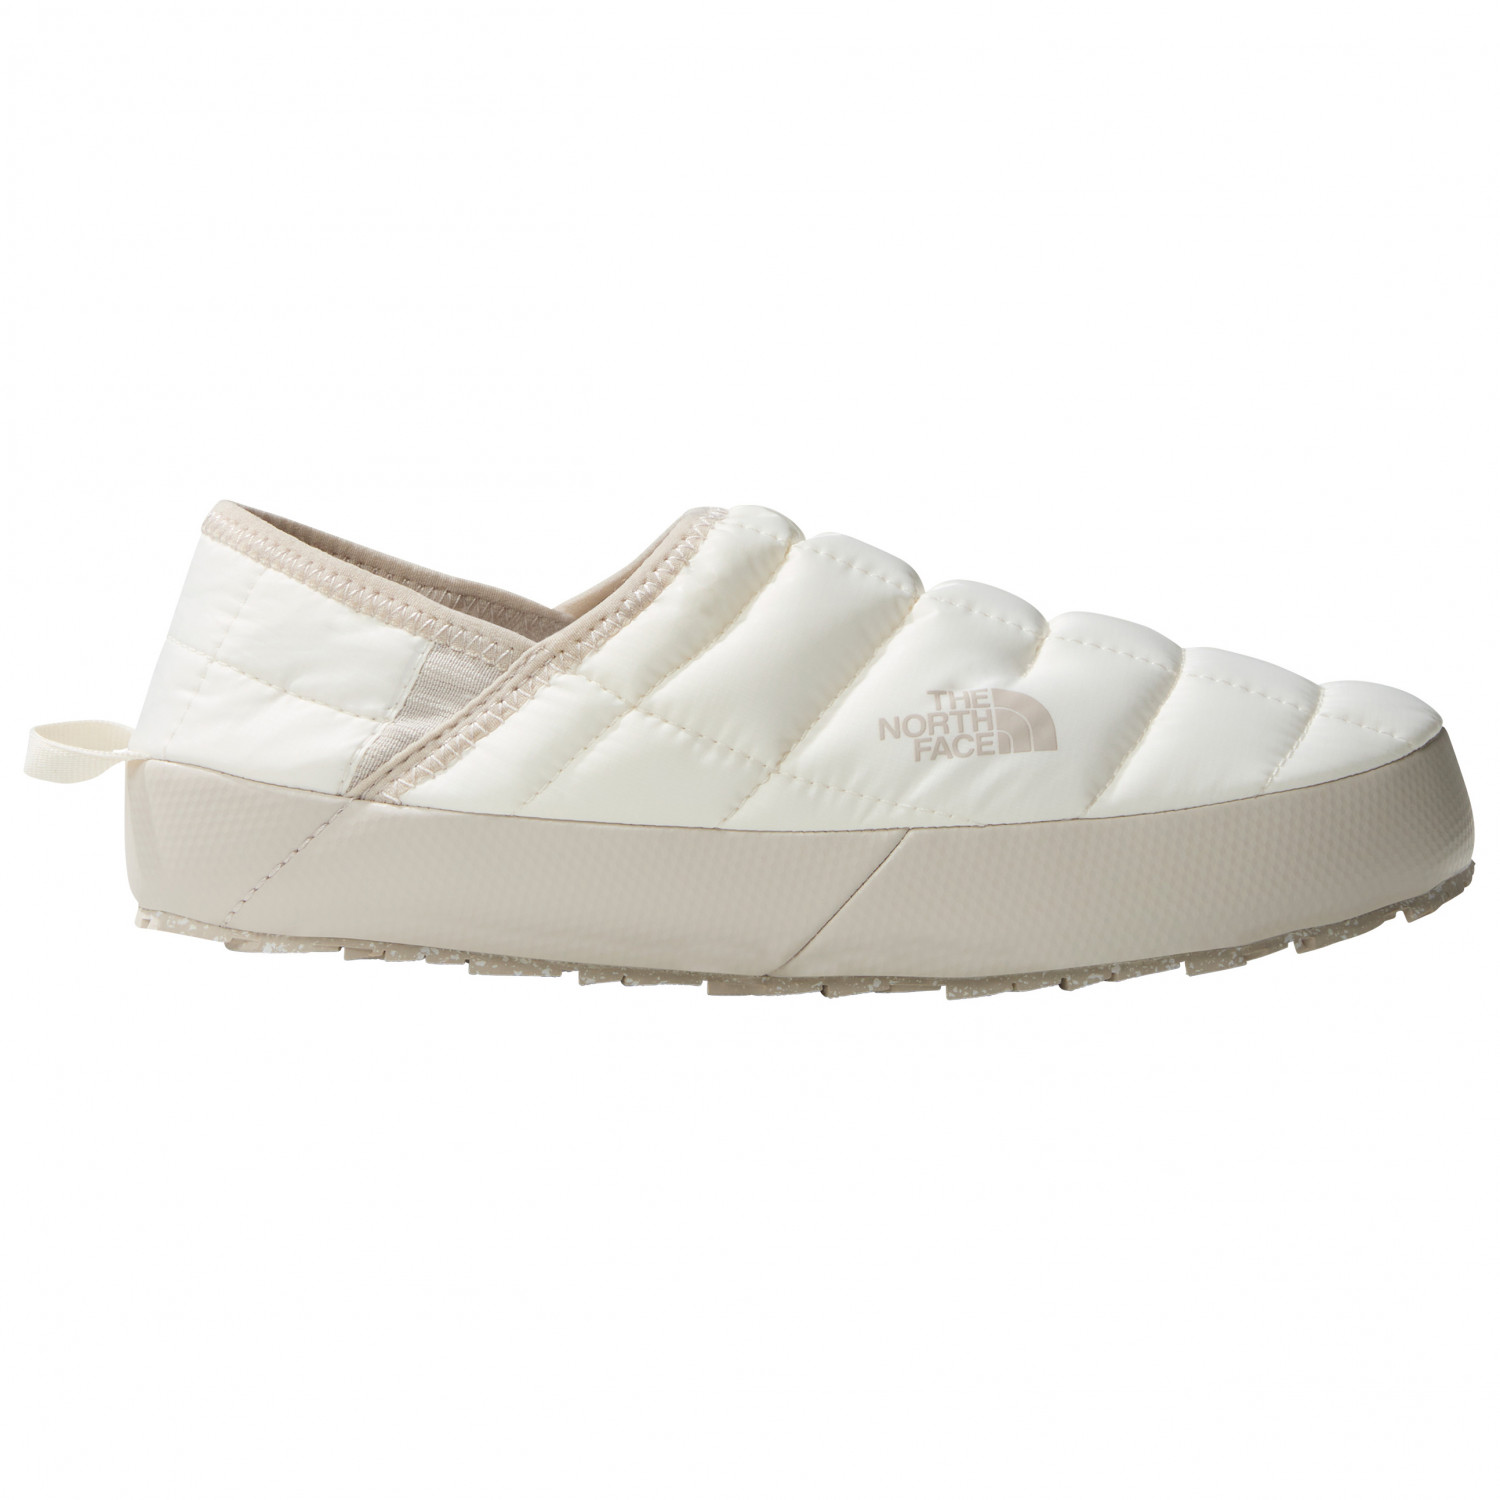 Домашние тапочки The North Face Women's ThermoBall Traction Mule V, цвет Gardenia White/Silver Grey мужские мюли the north face thermoball eco traction черный